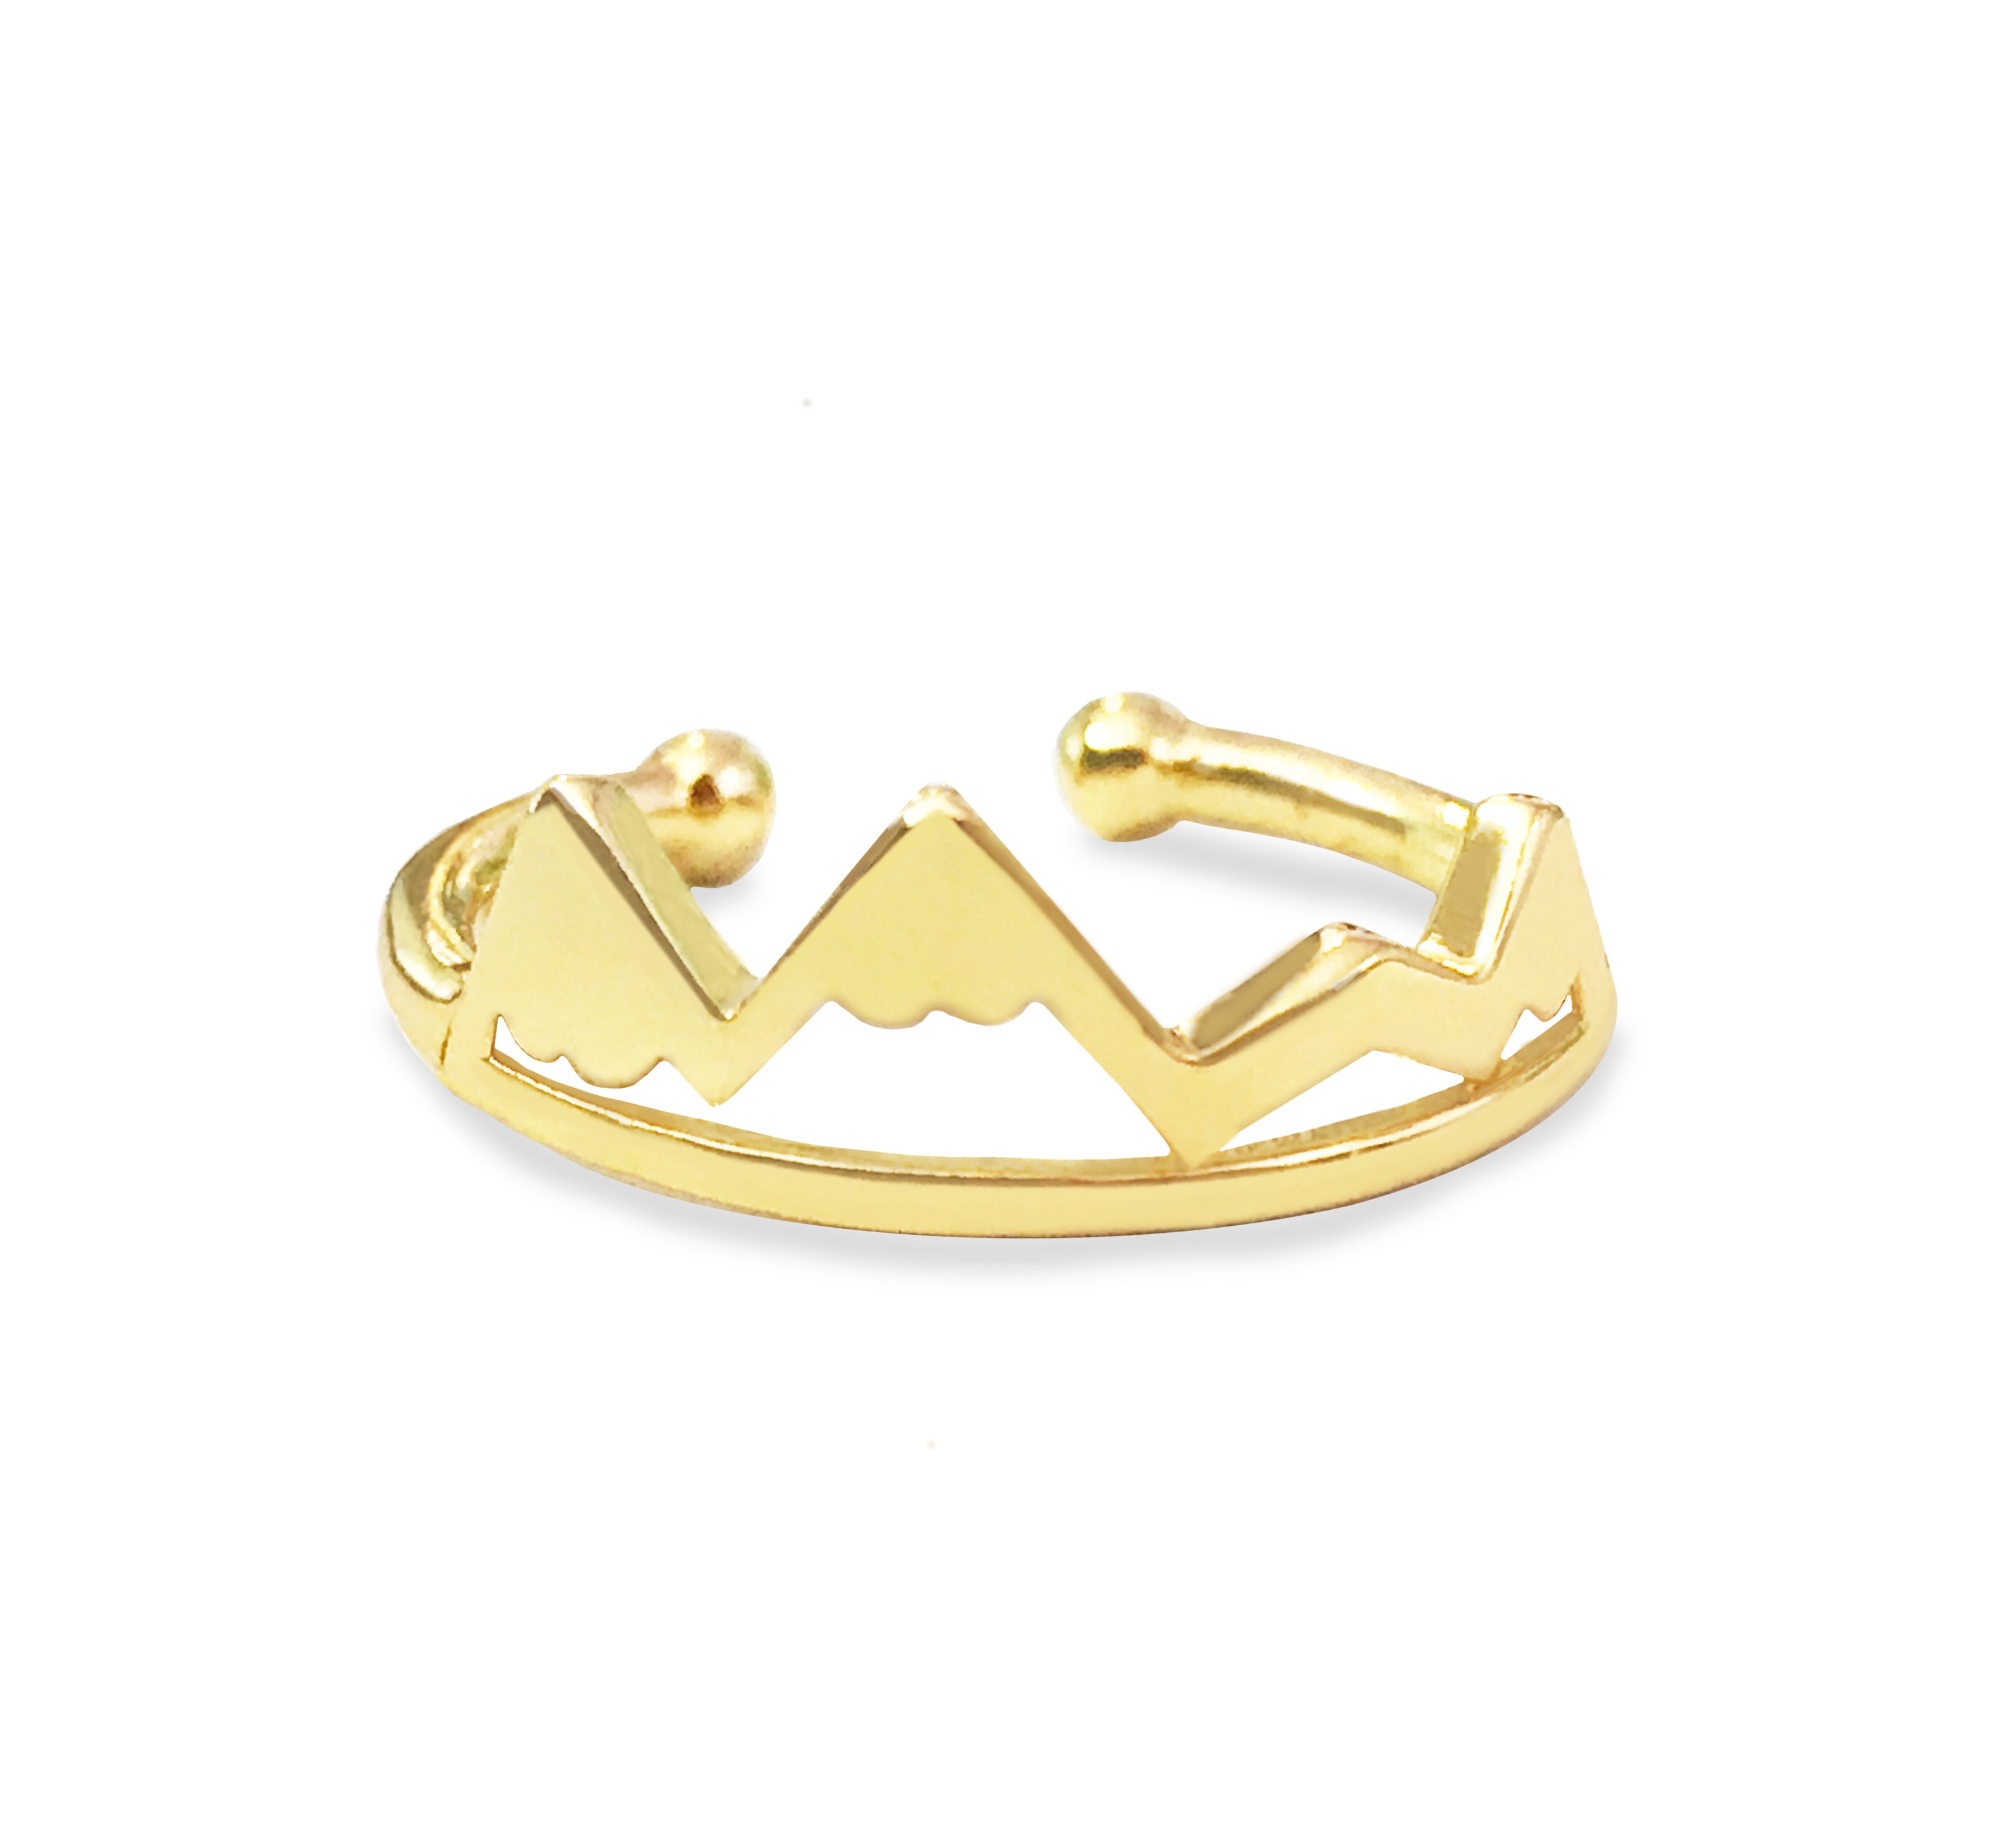 Gold Mountain Ring Victoria Collection